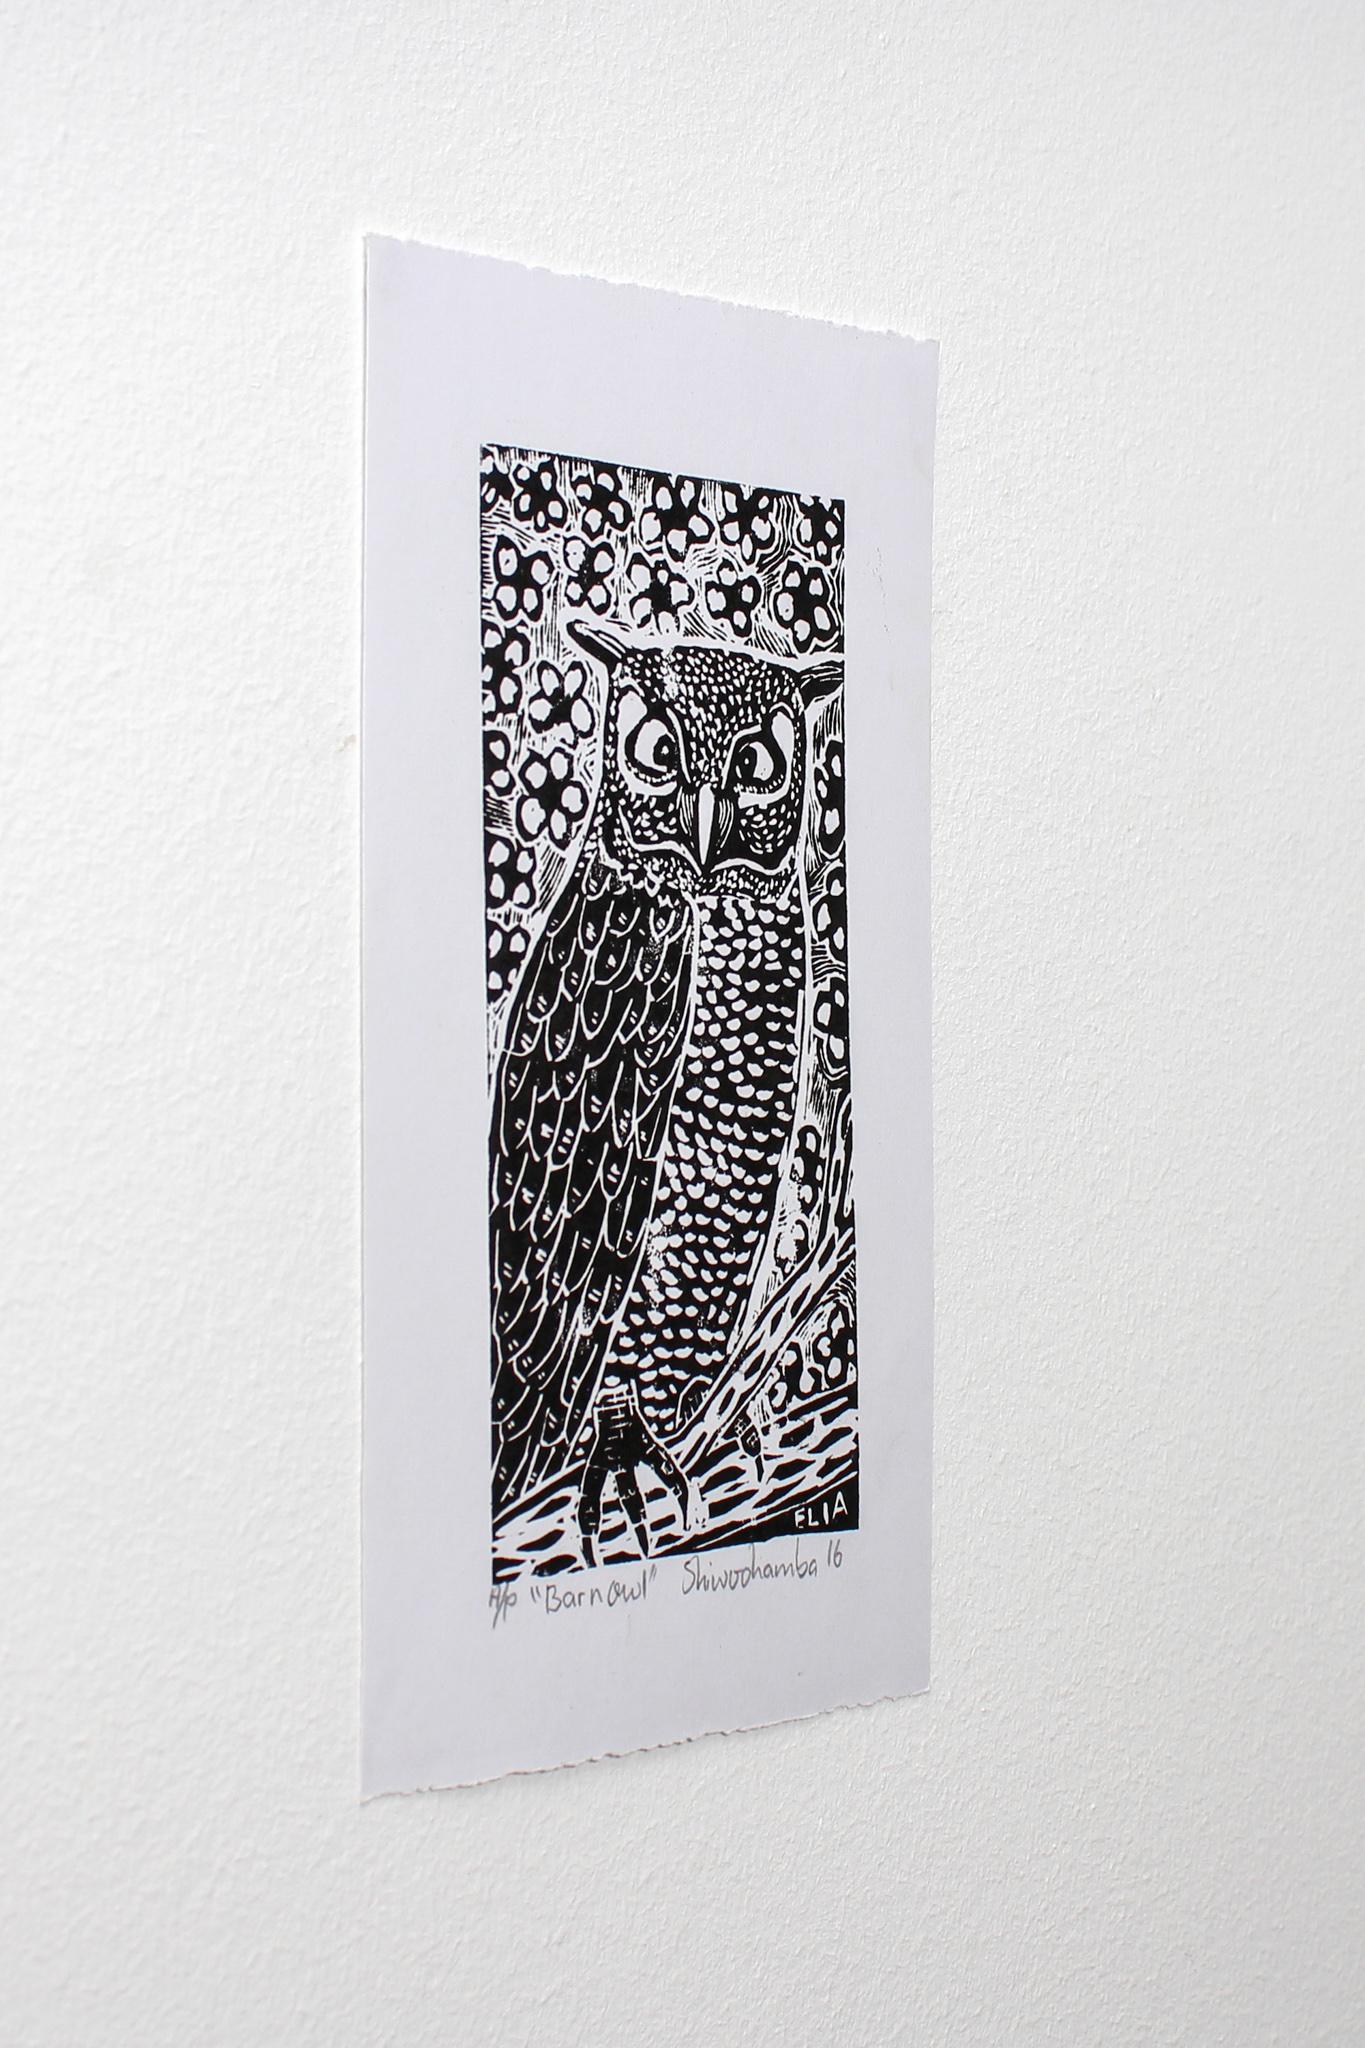 Barn owl, Linoleum block prints on paper.

Elia Shiwoohamba was born in 1981 in Windhoek, Namibia. He graduated from the John Muafangejo Art Centre in Windhoek in 2006. Specialising in printmaking and sculpture, Shiwoohamba works as a professional